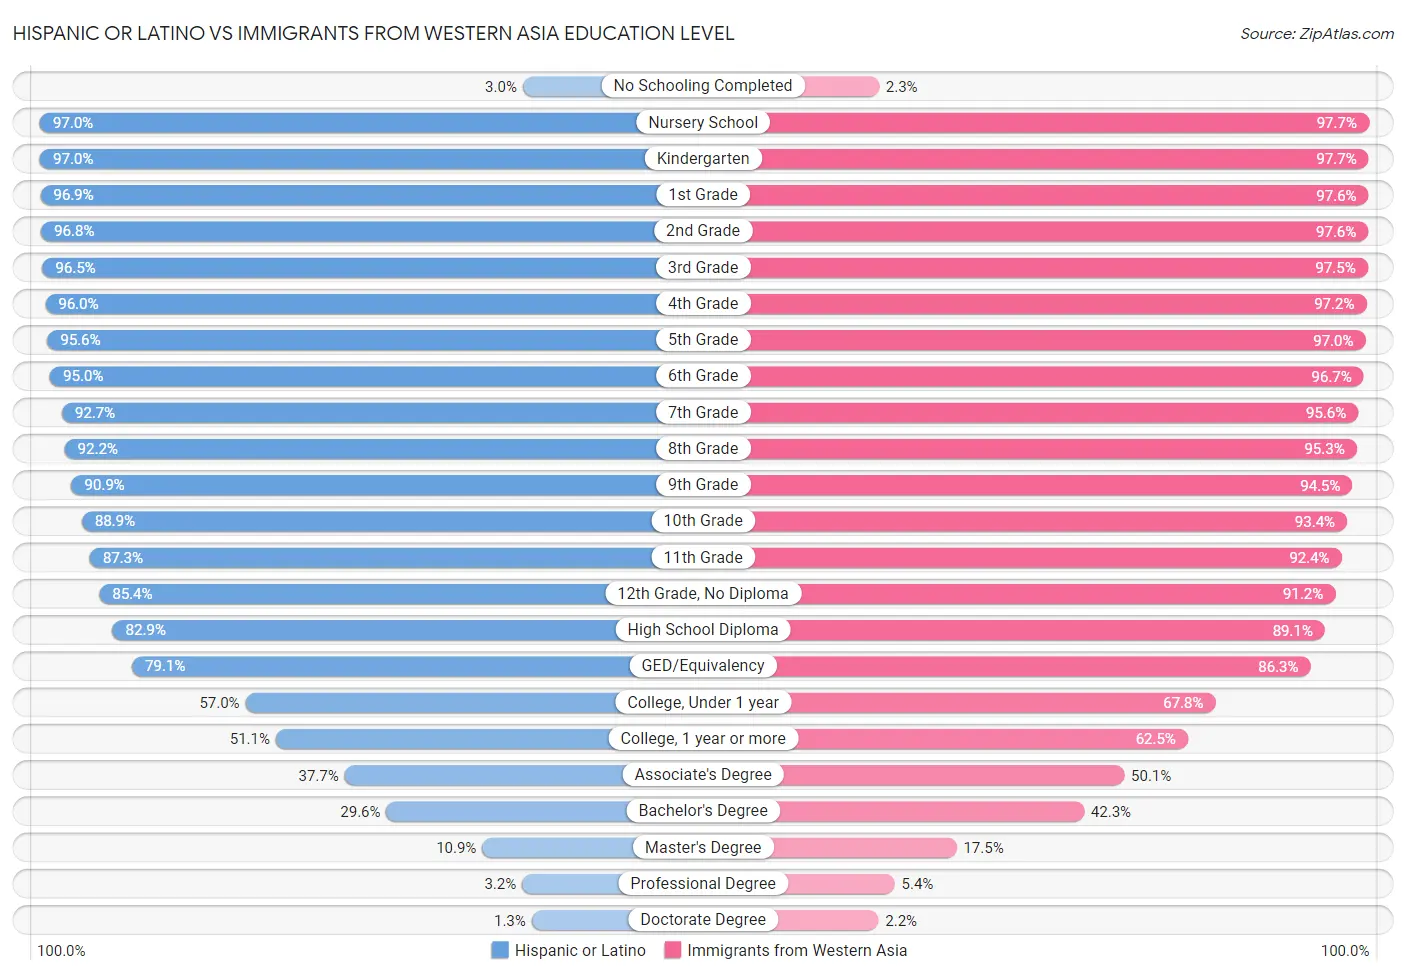 Hispanic or Latino vs Immigrants from Western Asia Education Level